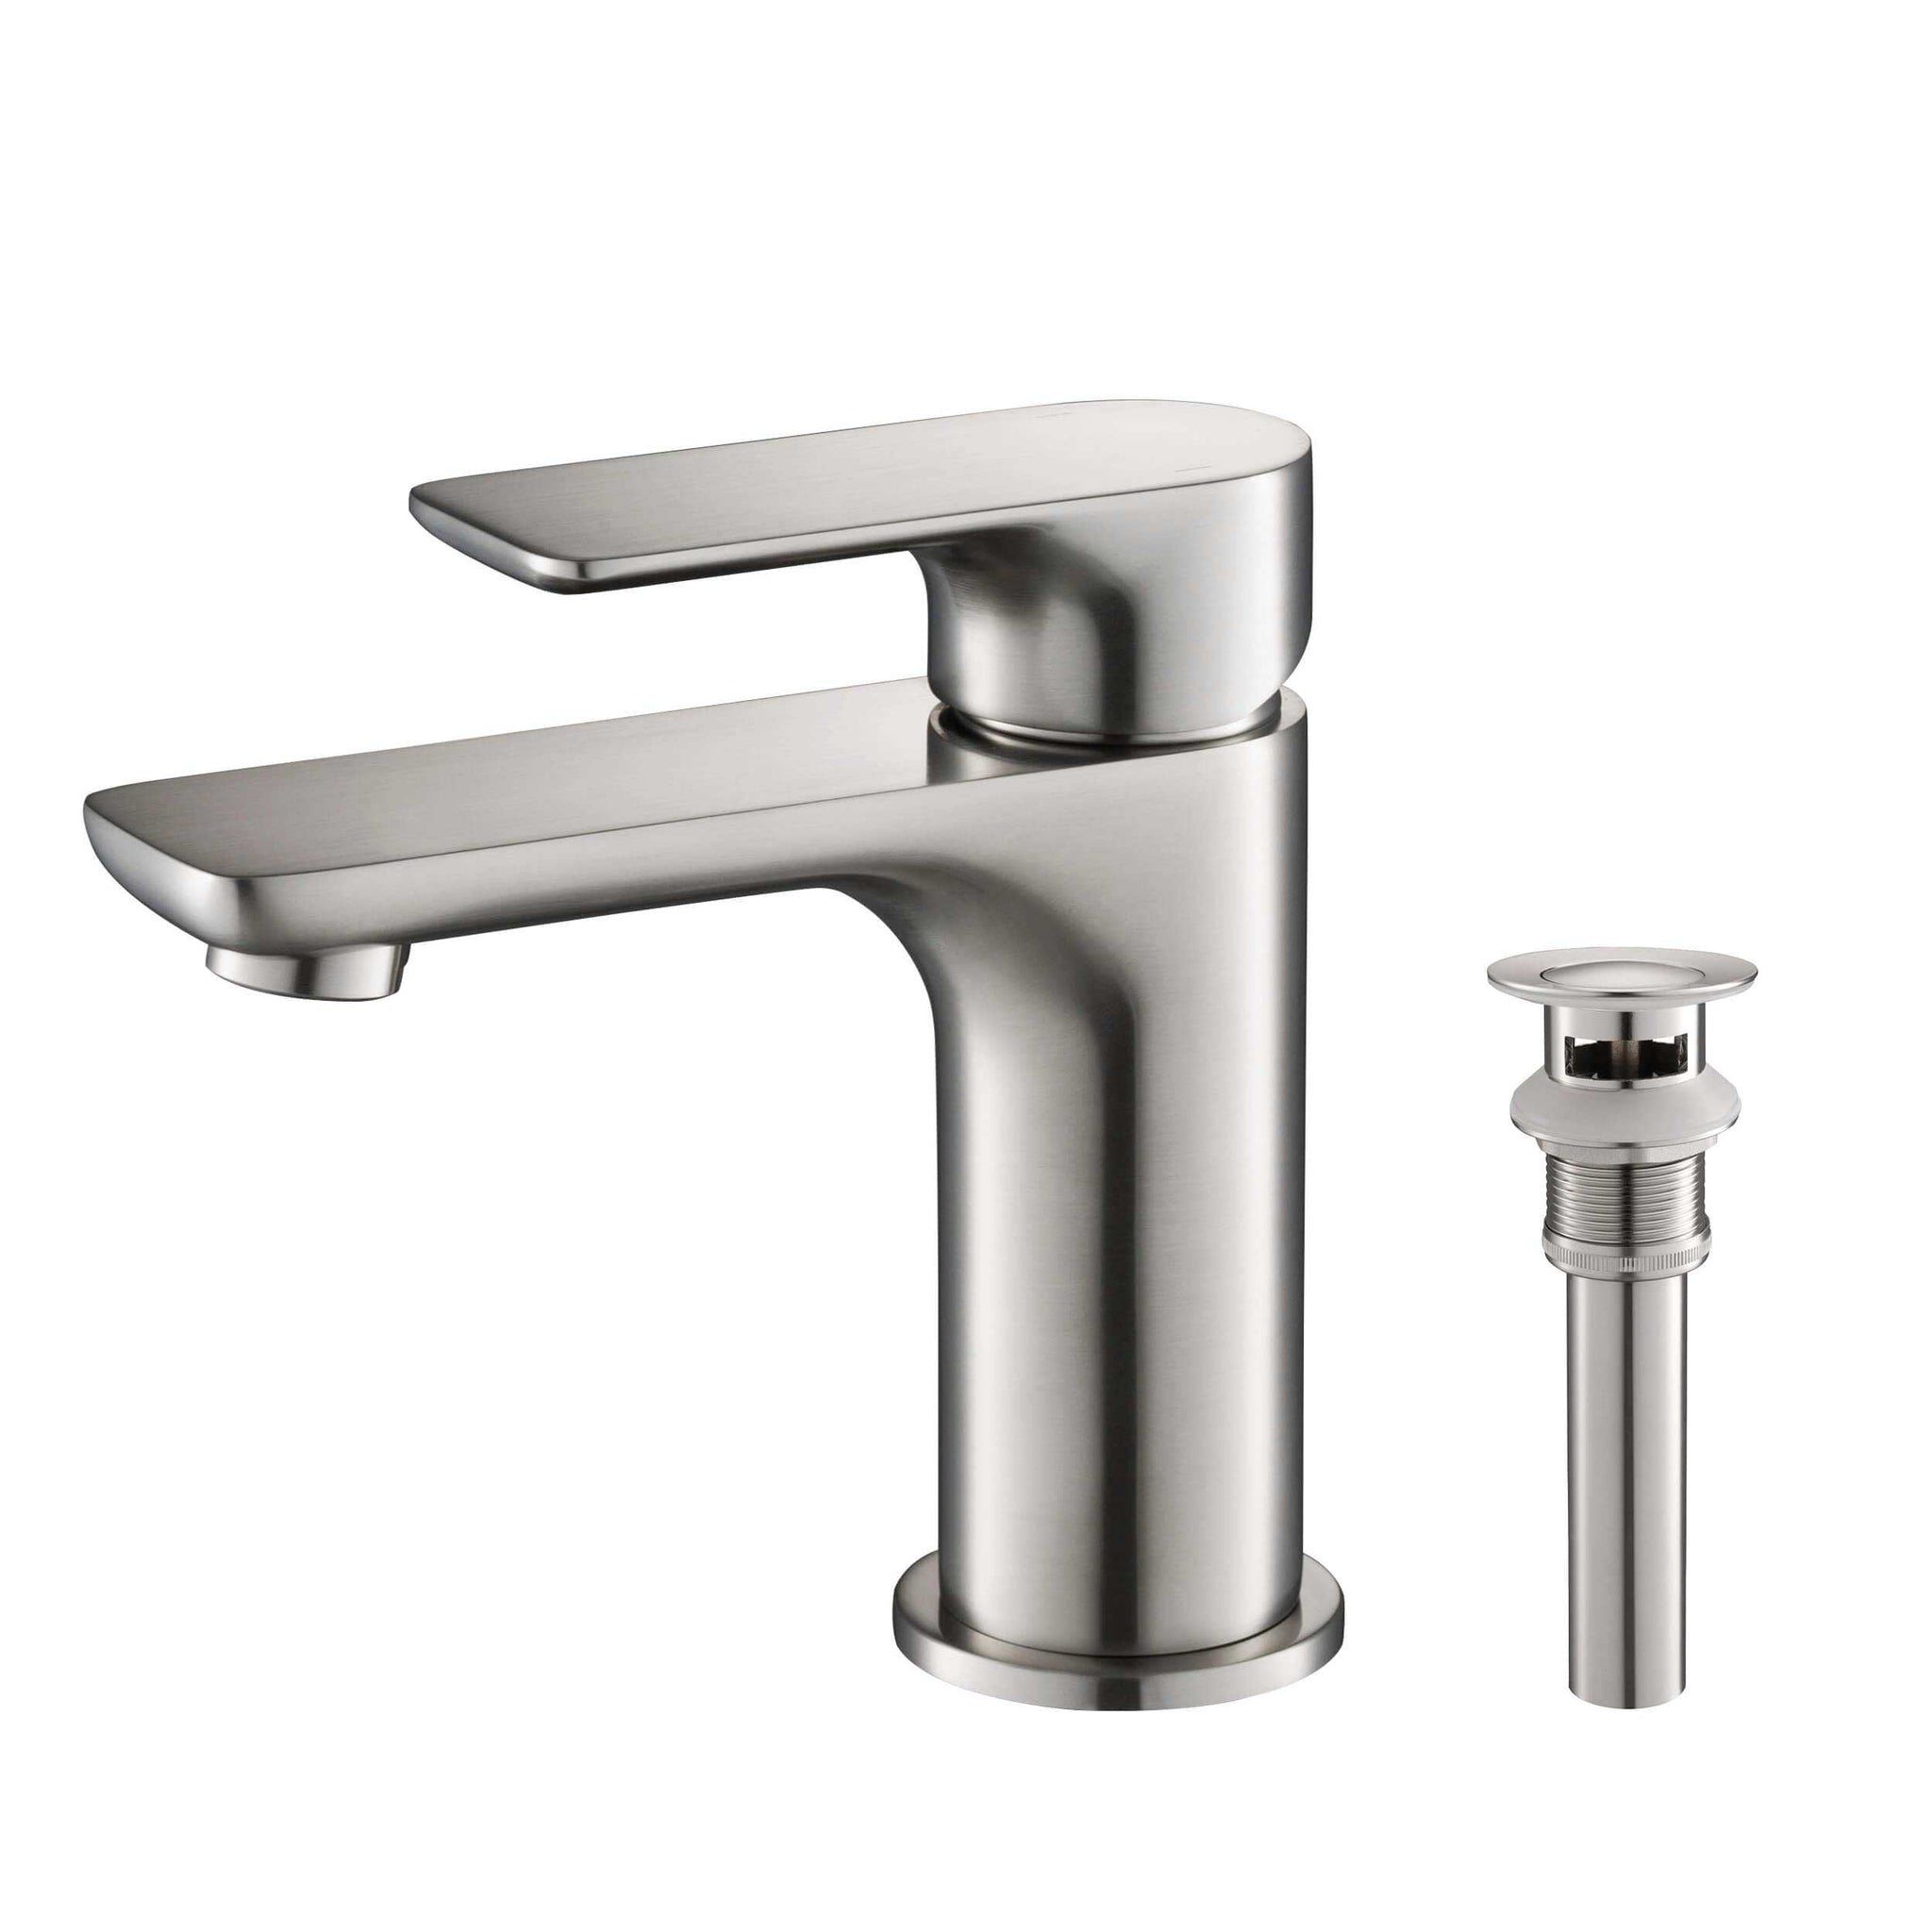 KIBI, KIBI Tender Single Handle Brushed Nickel Solid Brass Bathroom Sink Faucet With Pop-Up Drain Stopper Small Cover With Overflow